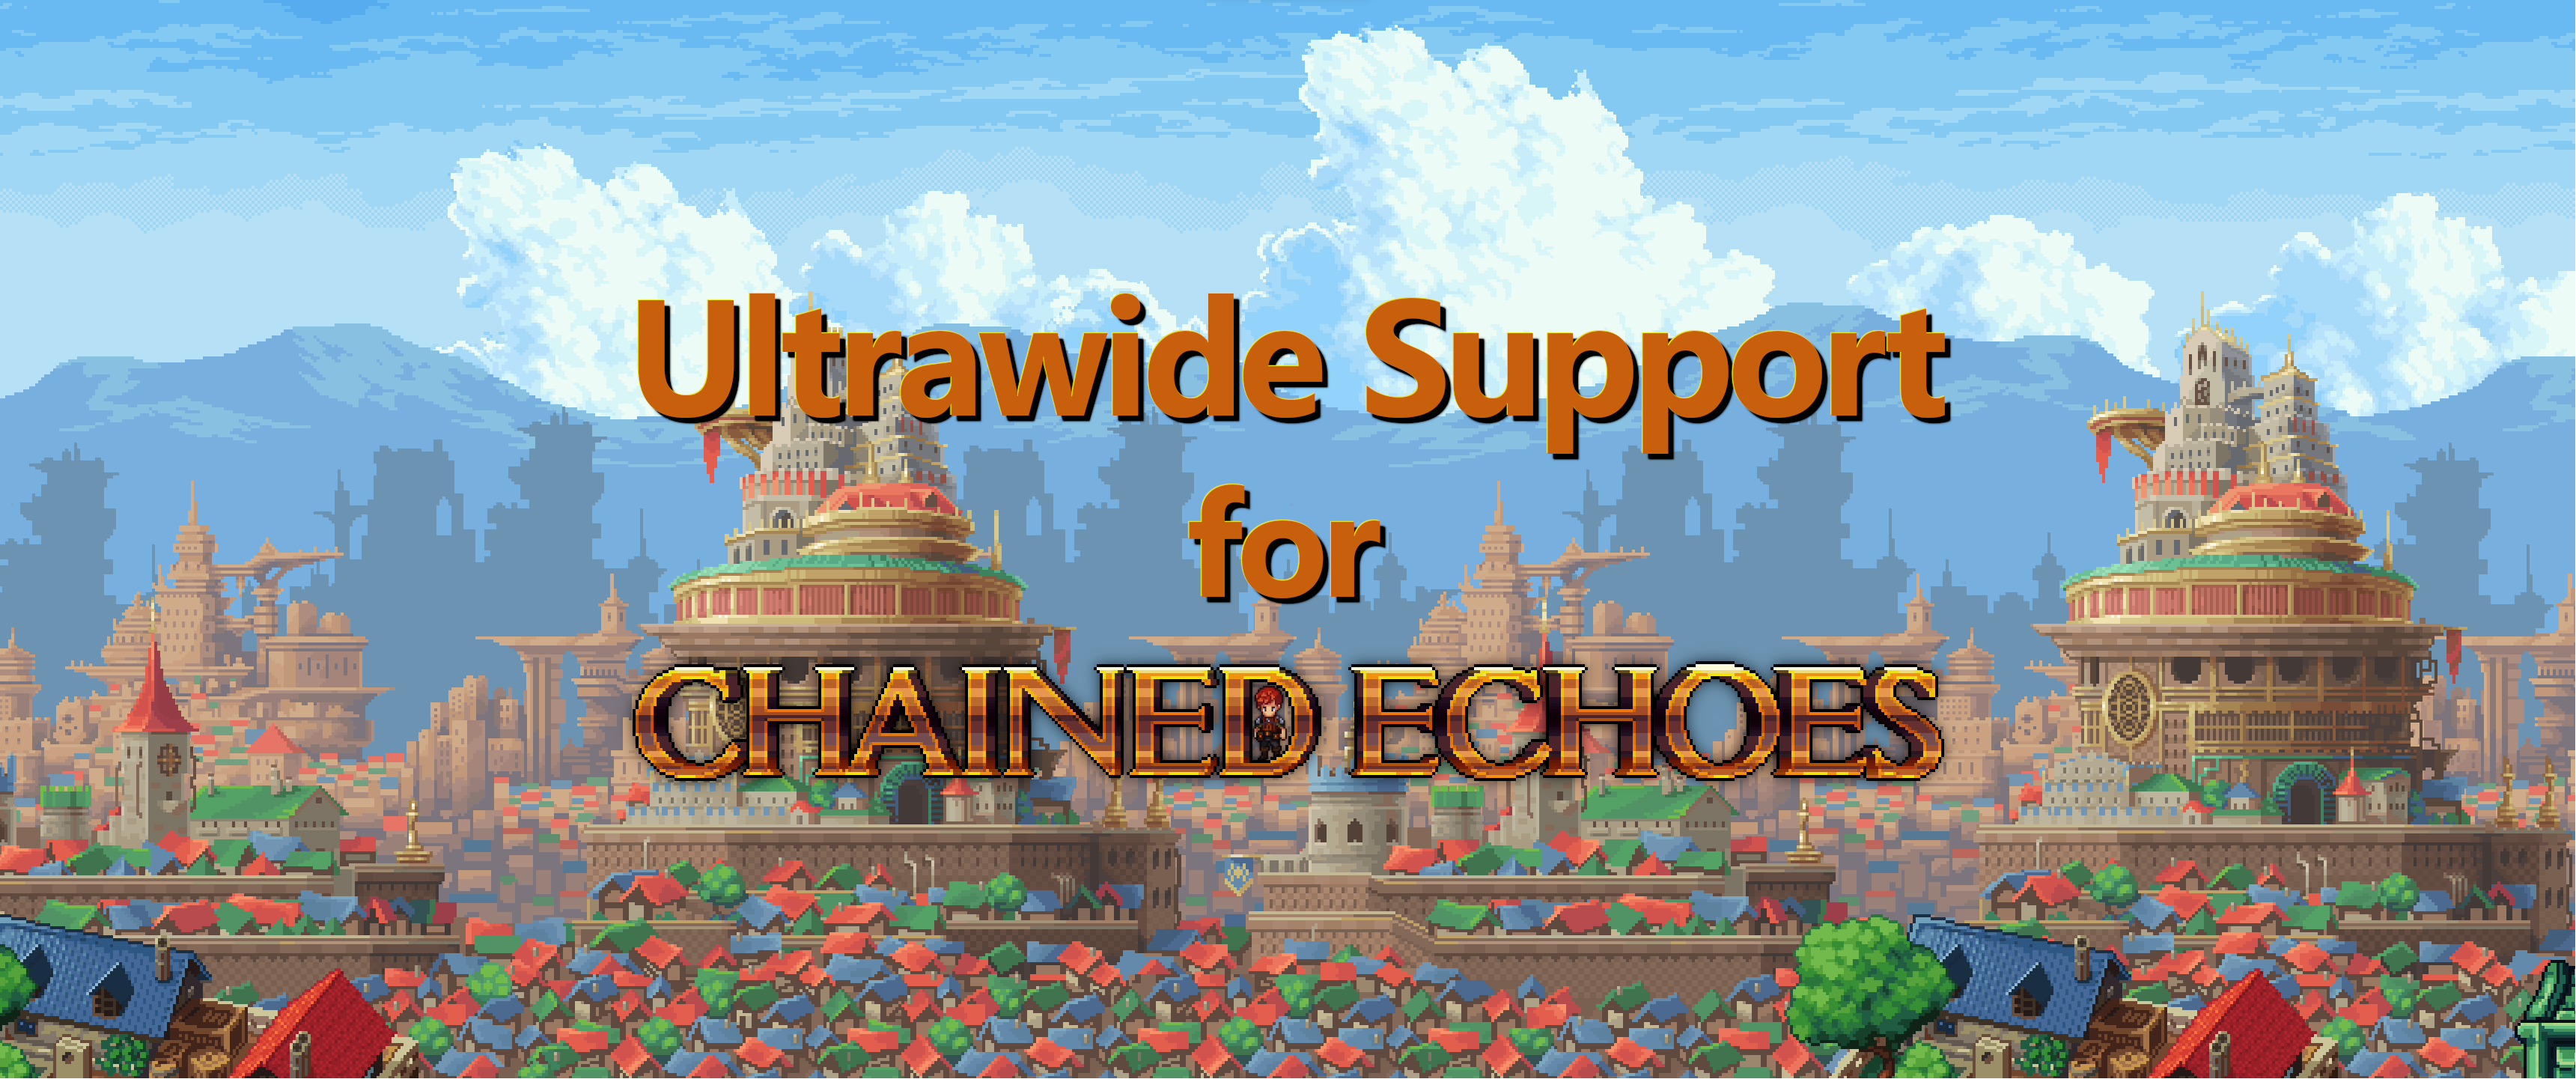 Chained Echoes Support at Modding Tools - Nexus Mods